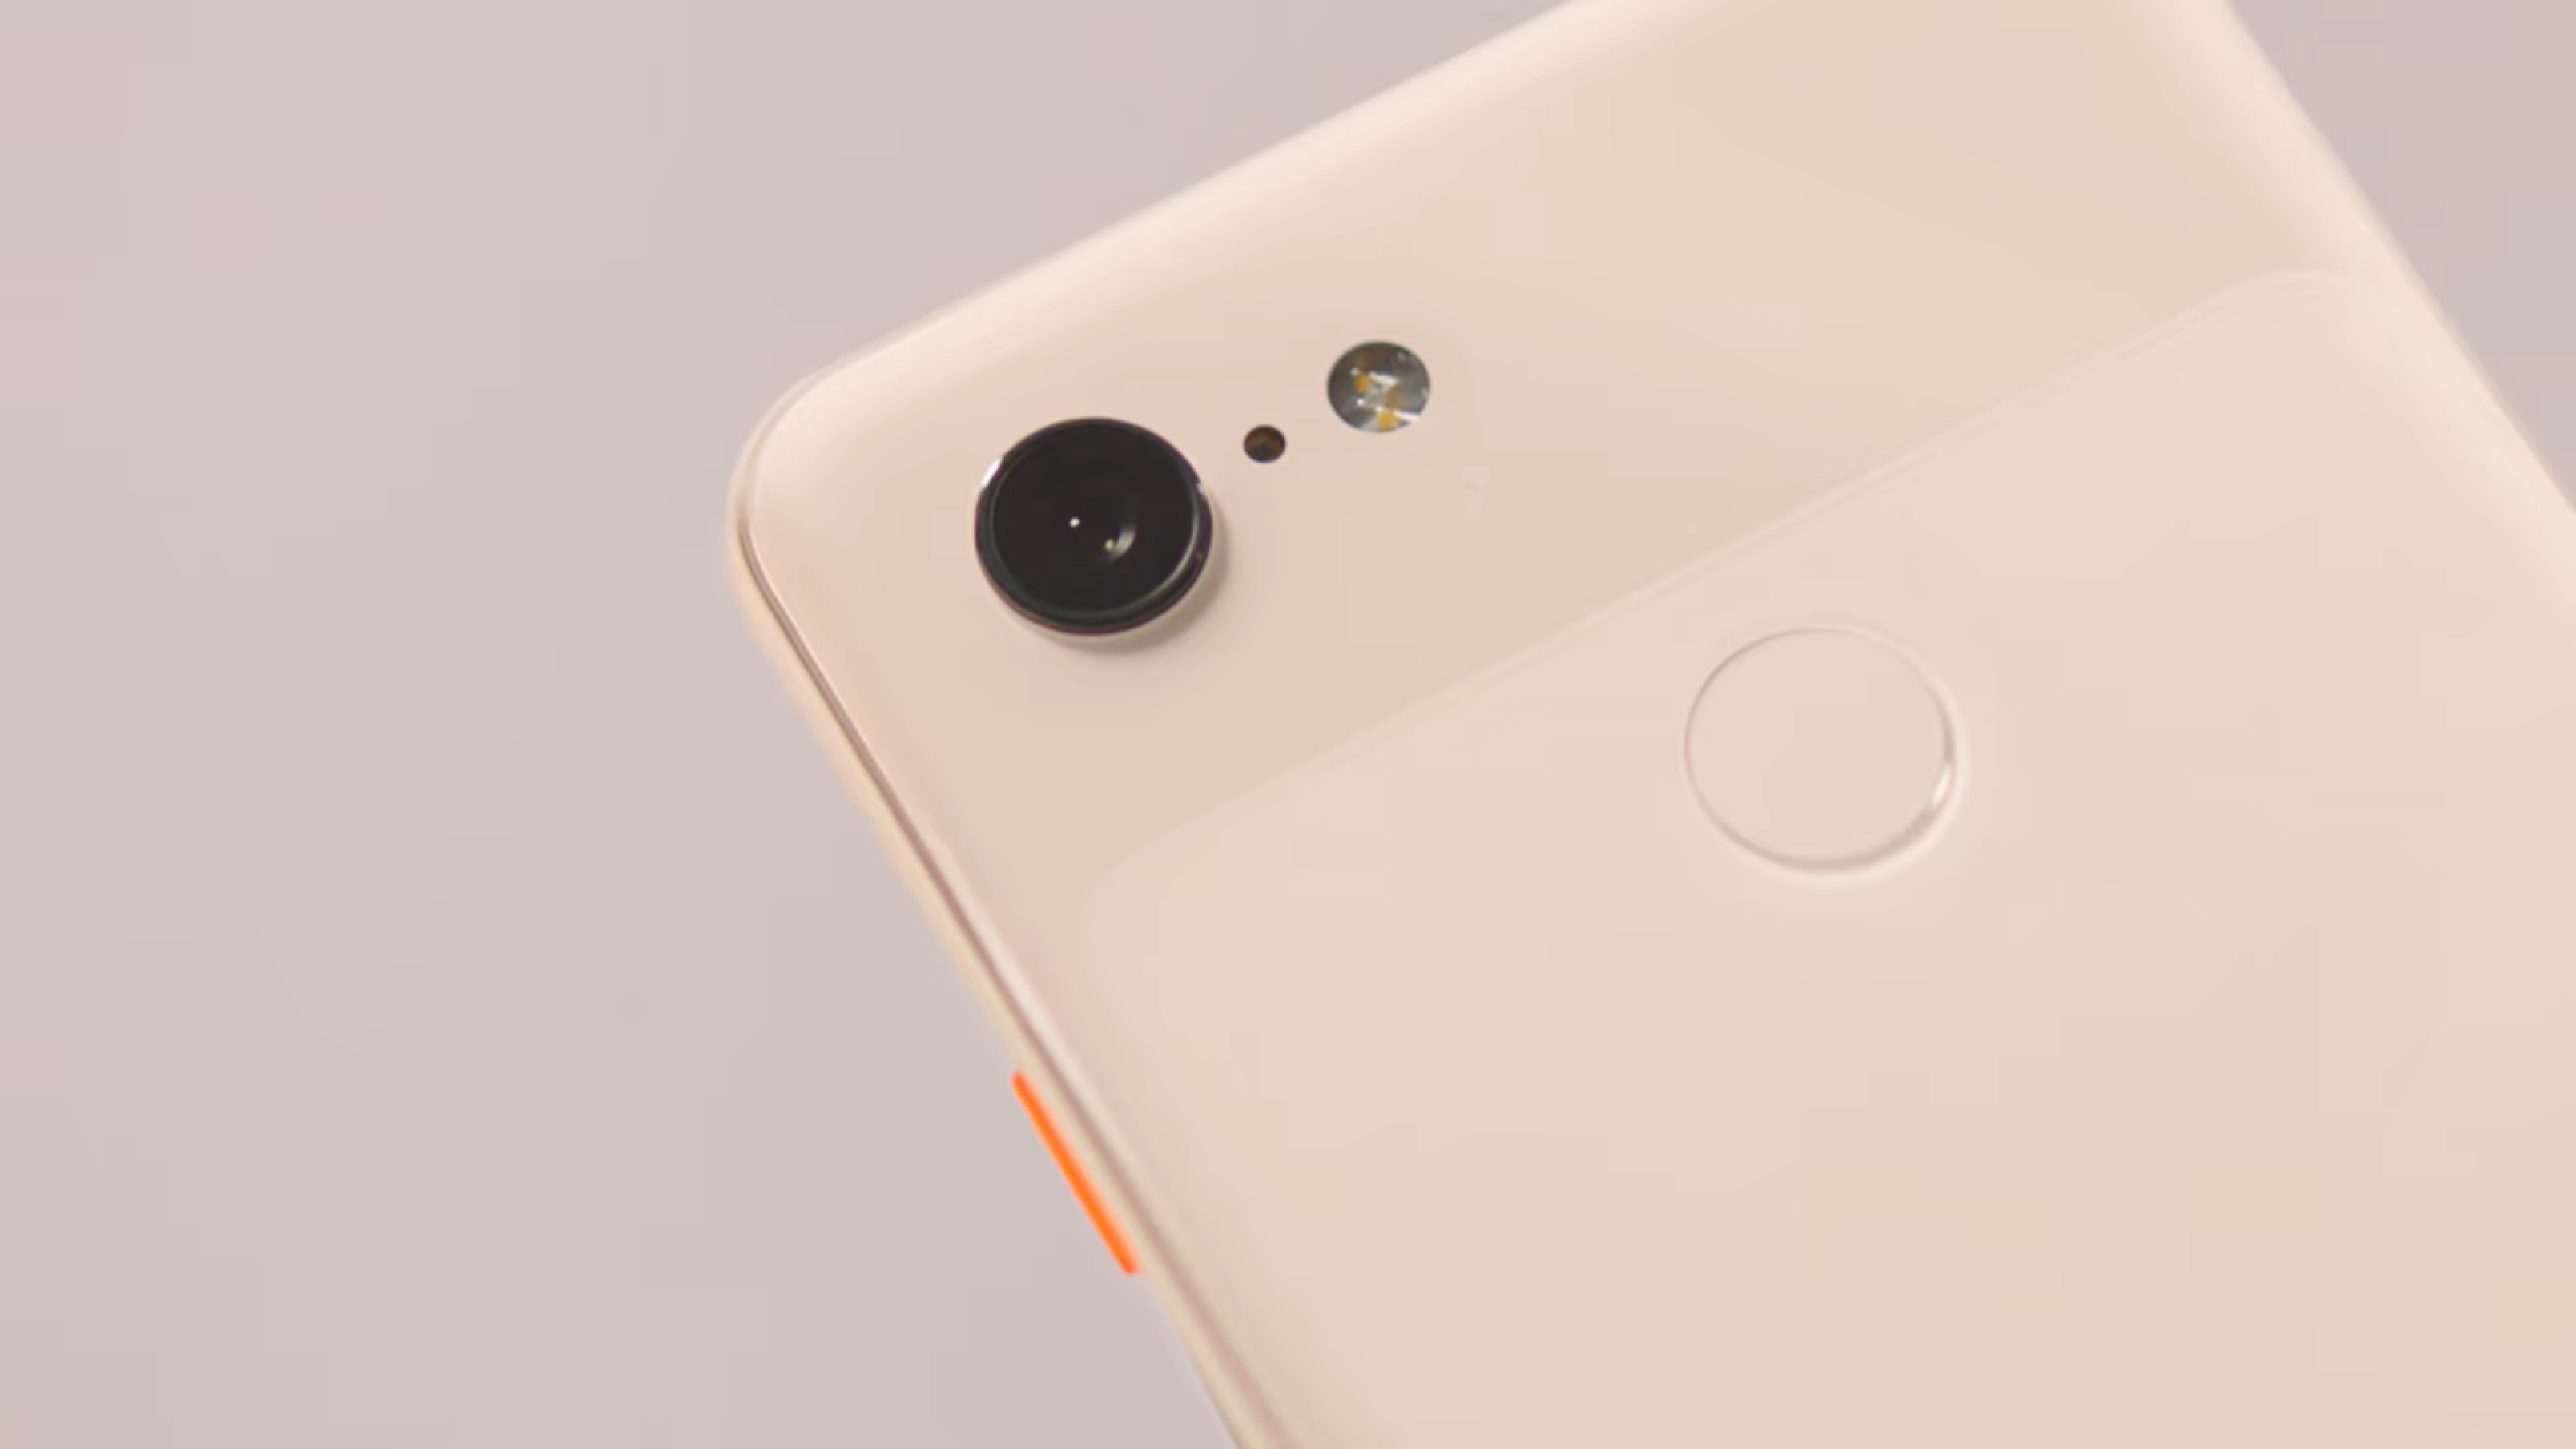 The Pixel 3 XL and Pixel 2 XL both have a single-lens rear camera